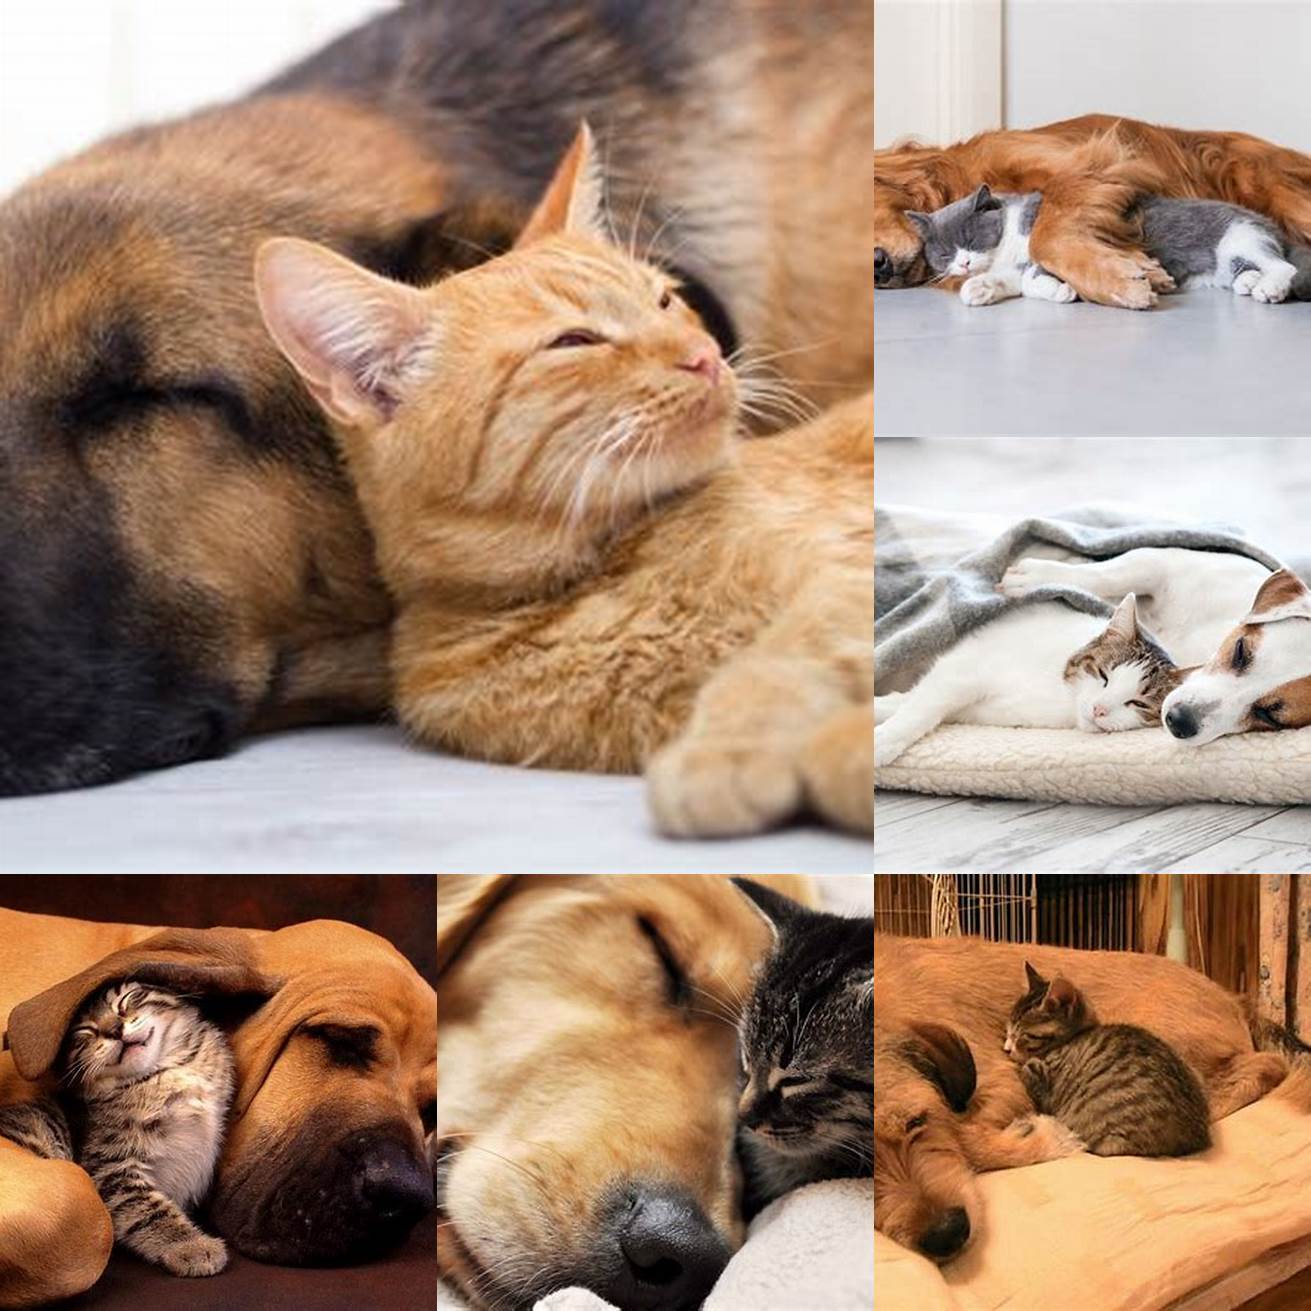 A dog and a cat sleeping together